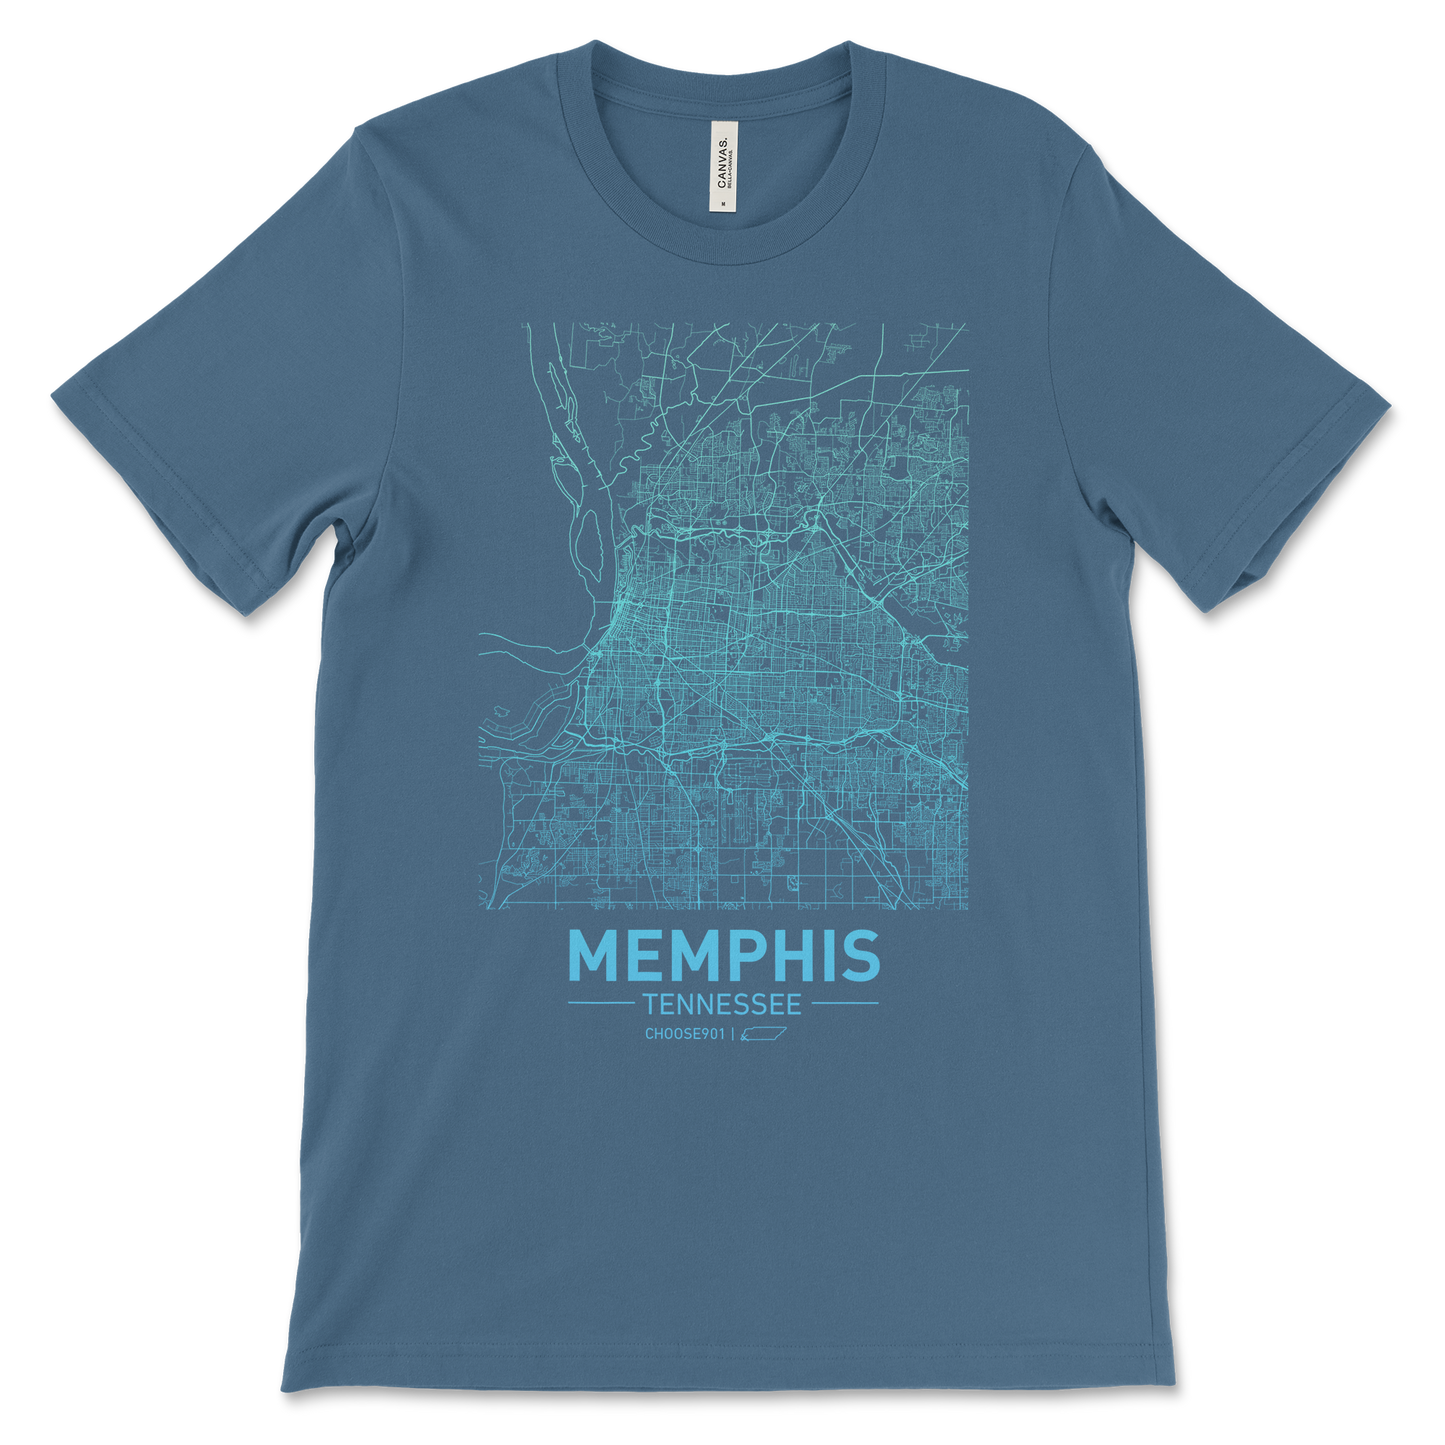 Cool Blue printed shirt featuring a white city map outline of Memphis and the text "Memphis Tennessee" displayed prominently at the bottom.